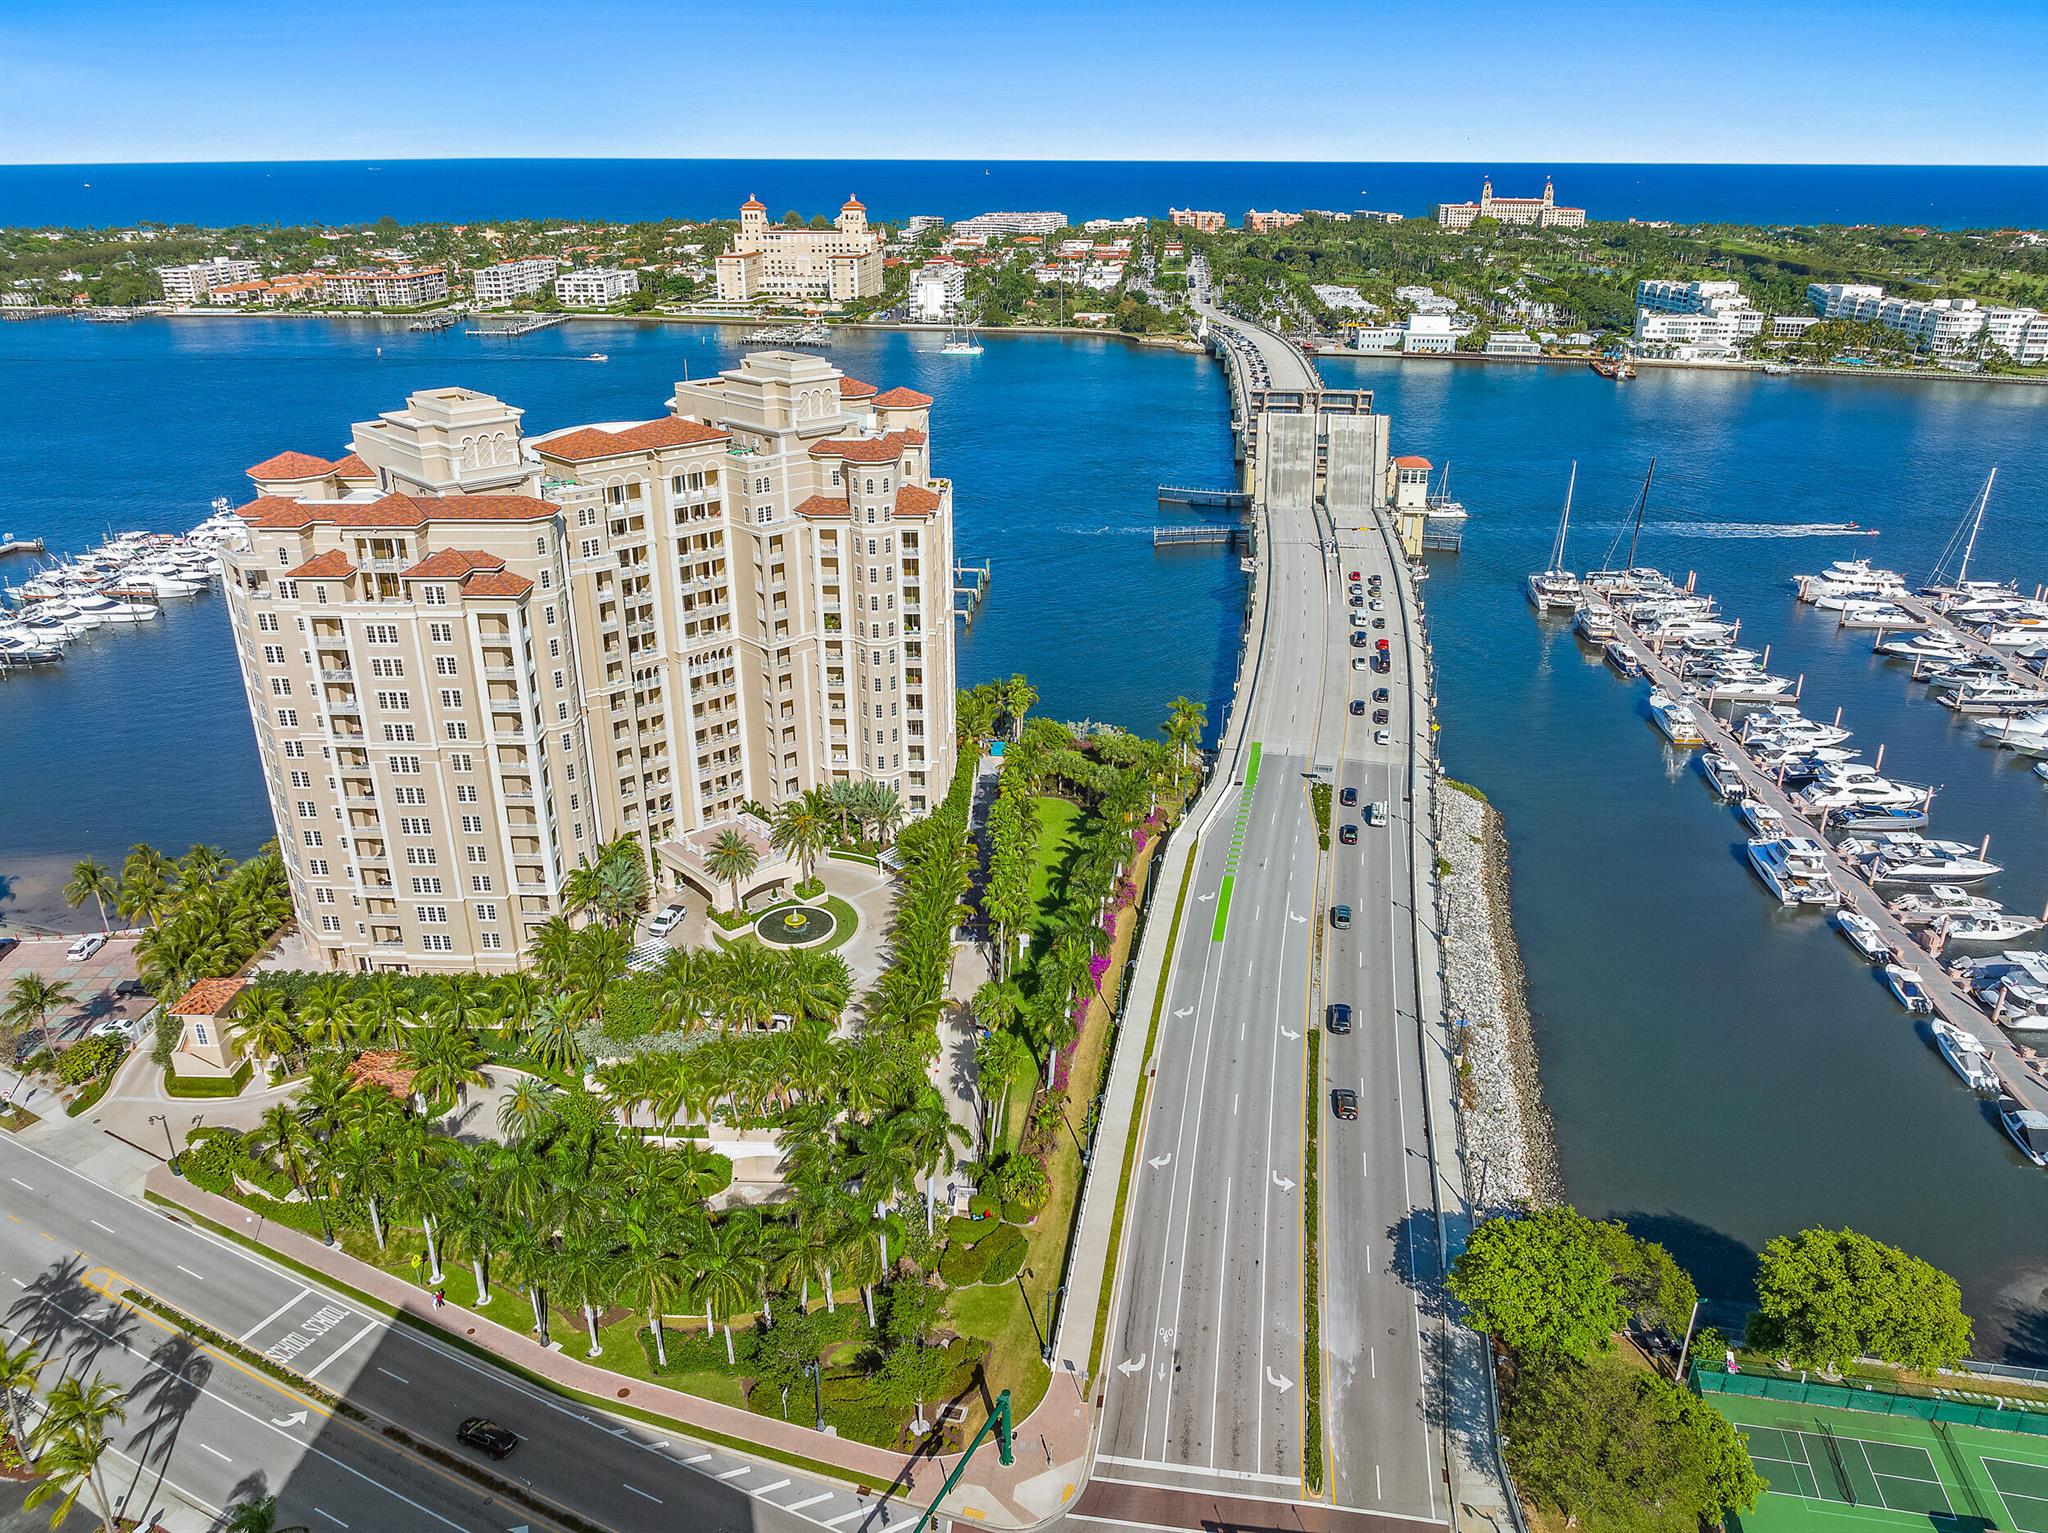 Welcome to this beautiful 8th floor unit at One Watermark Place. This mansion in the sky boasts panoramic views of the ocean, Palm Beach Island, and the intracoastal. Imagine living at a full-service, gated and secure resort year-round - all just steps to the center of Palm Beach. This turn-key home offers 4,747 square feet of living space, 3 generous bedrooms, 3.5 bathrooms, and unparalleled outdoor space which features breathtaking and magical views of Palm Beach Island - as it is nestles scenically between the Intracoastal waterway and Atlantic Ocean. Watch the boats go by or admire the endless blue ocean, all from your private oasis at One Watermark Place. Your Palm Beach dream is closer than you think.